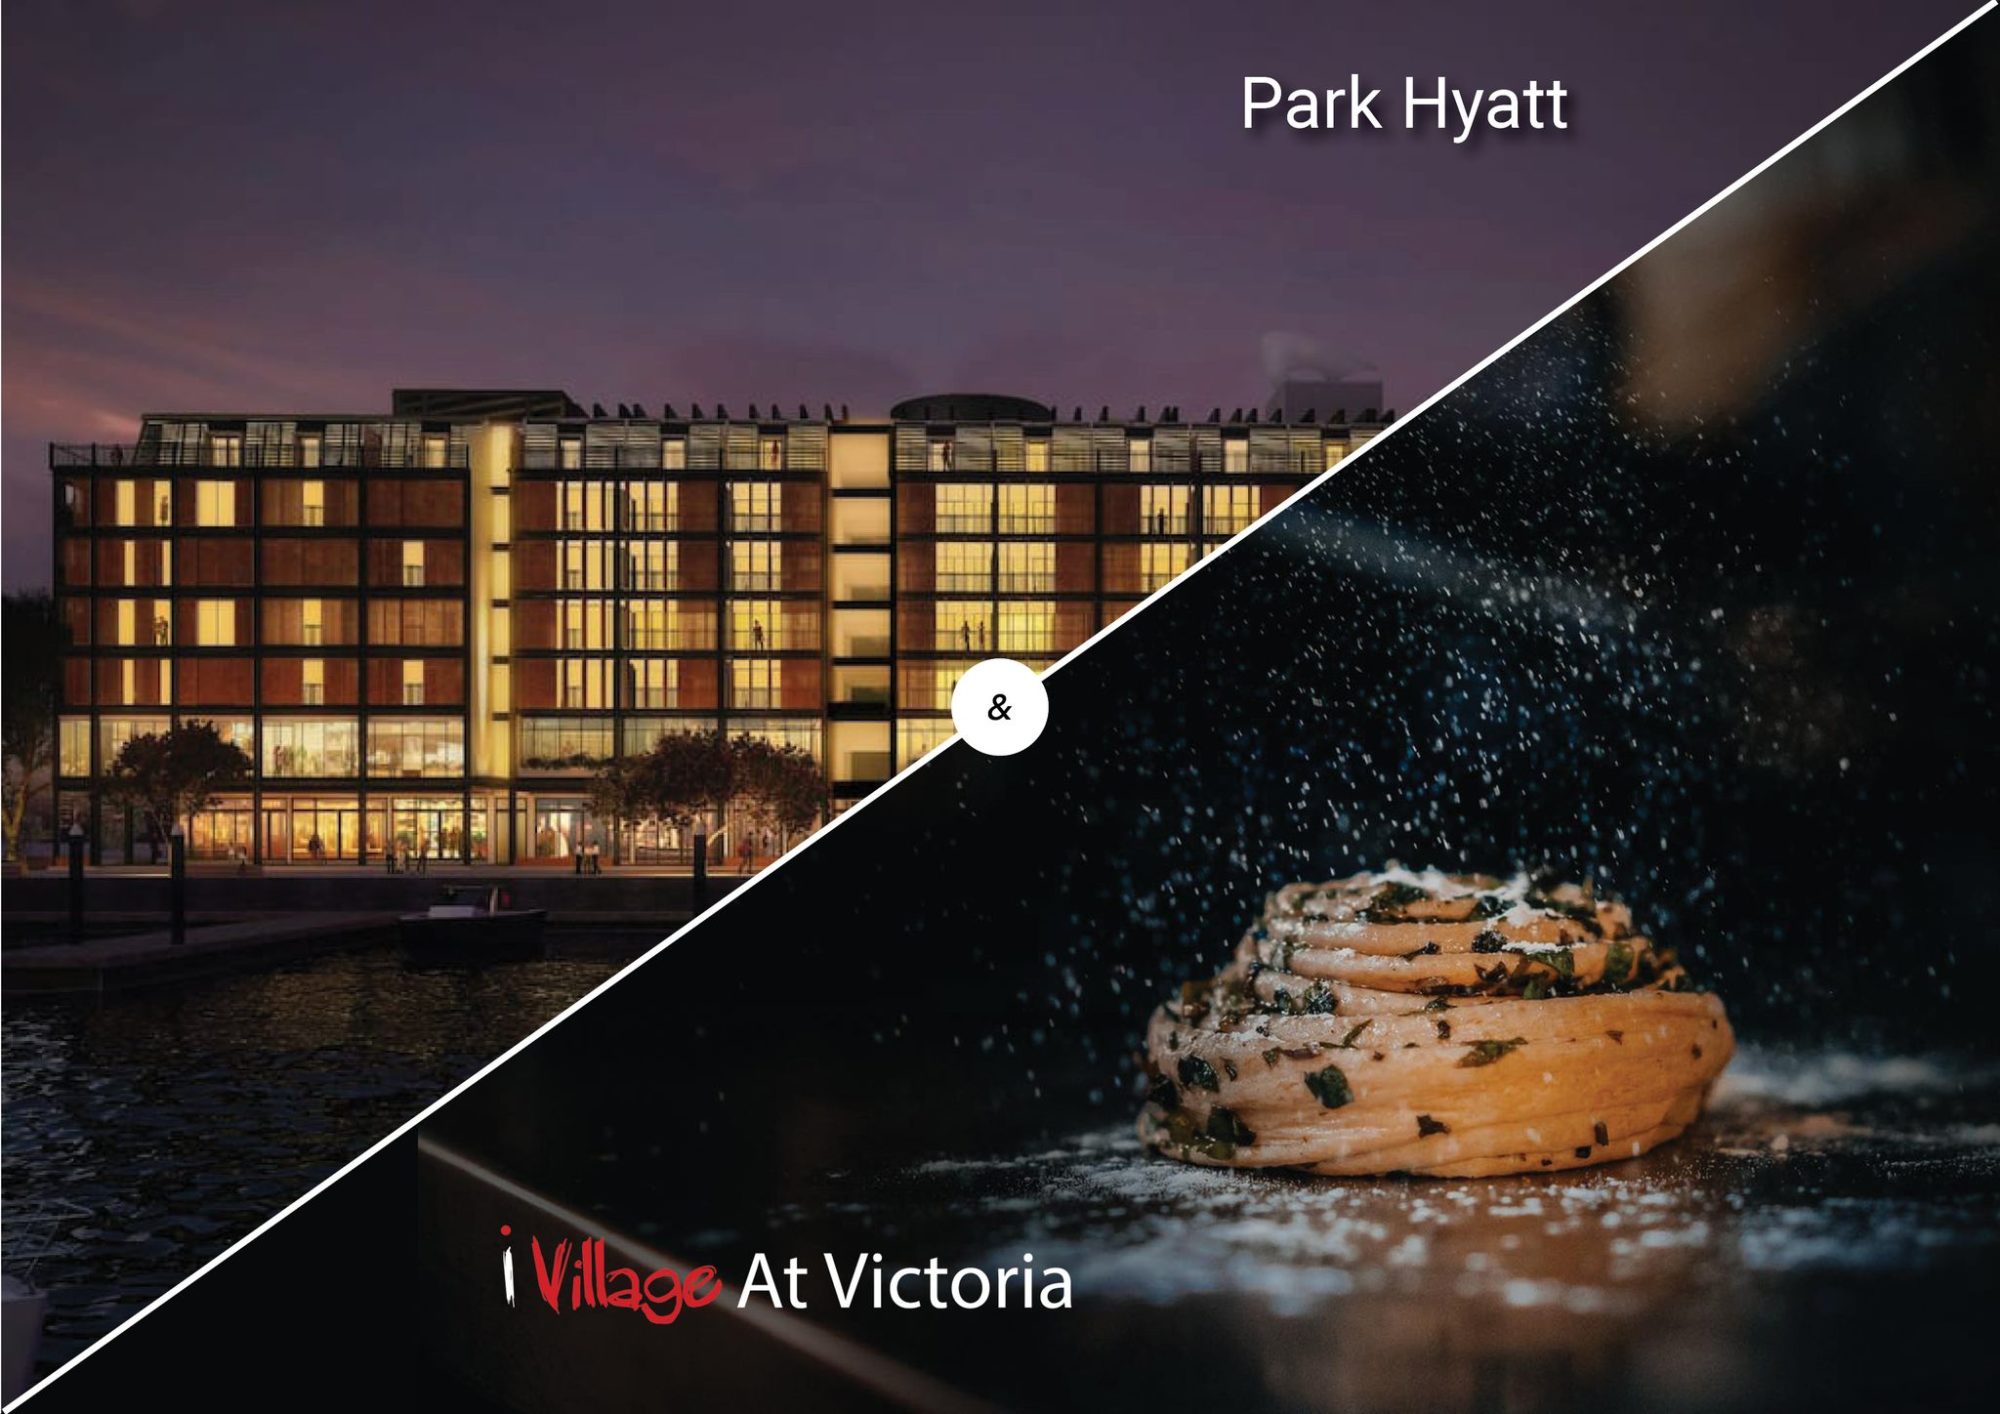 iVillage at Victoria and Hyatt Park Auckland Catering.